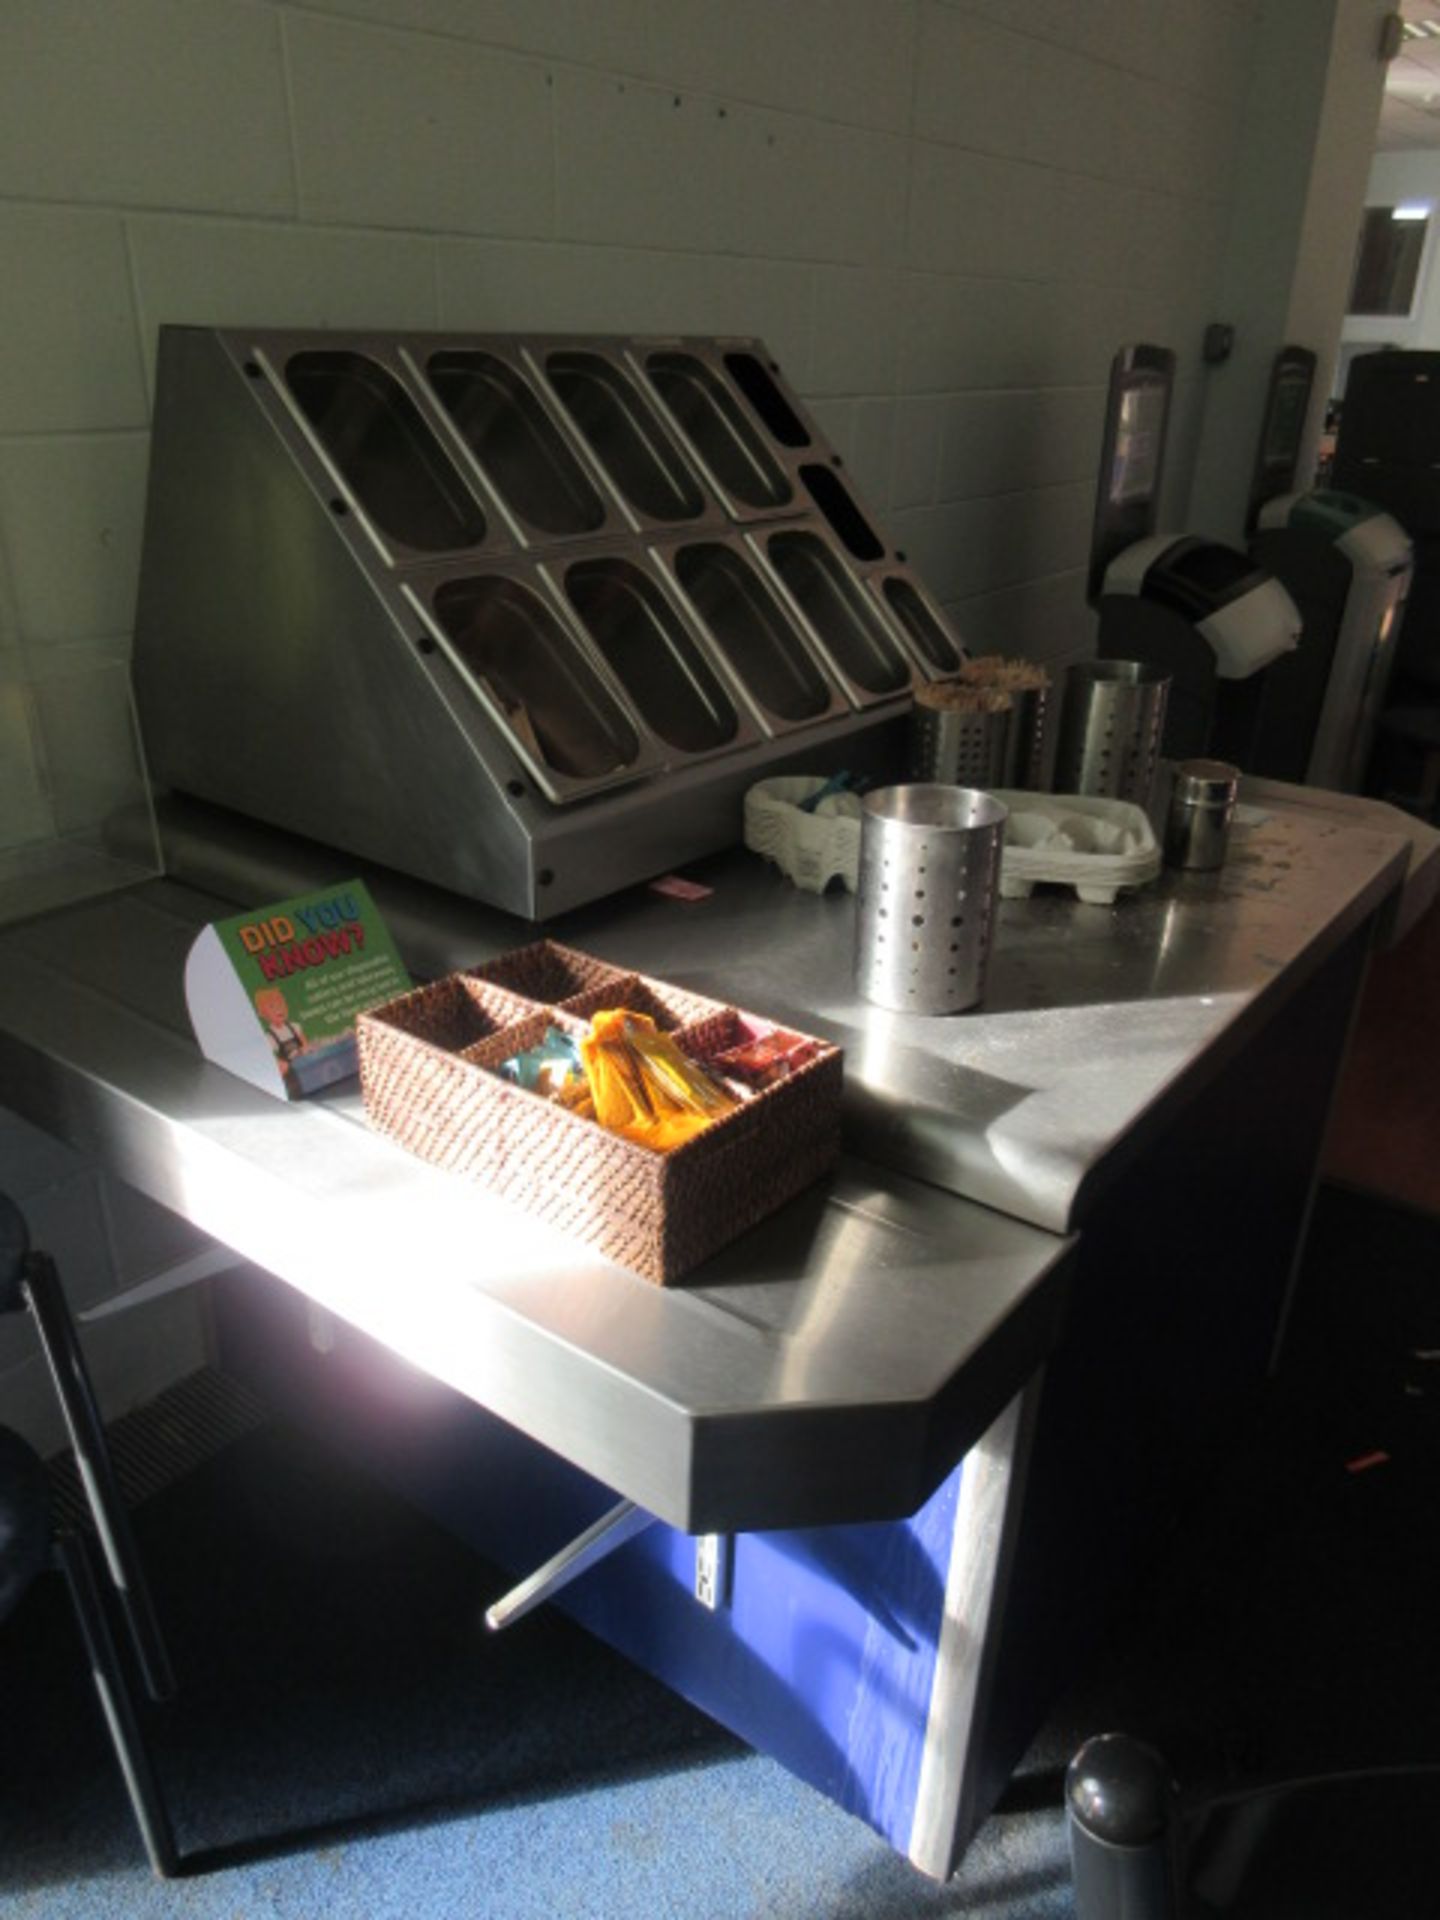 A CUTLERY AND CONDIMENTS COUNTER